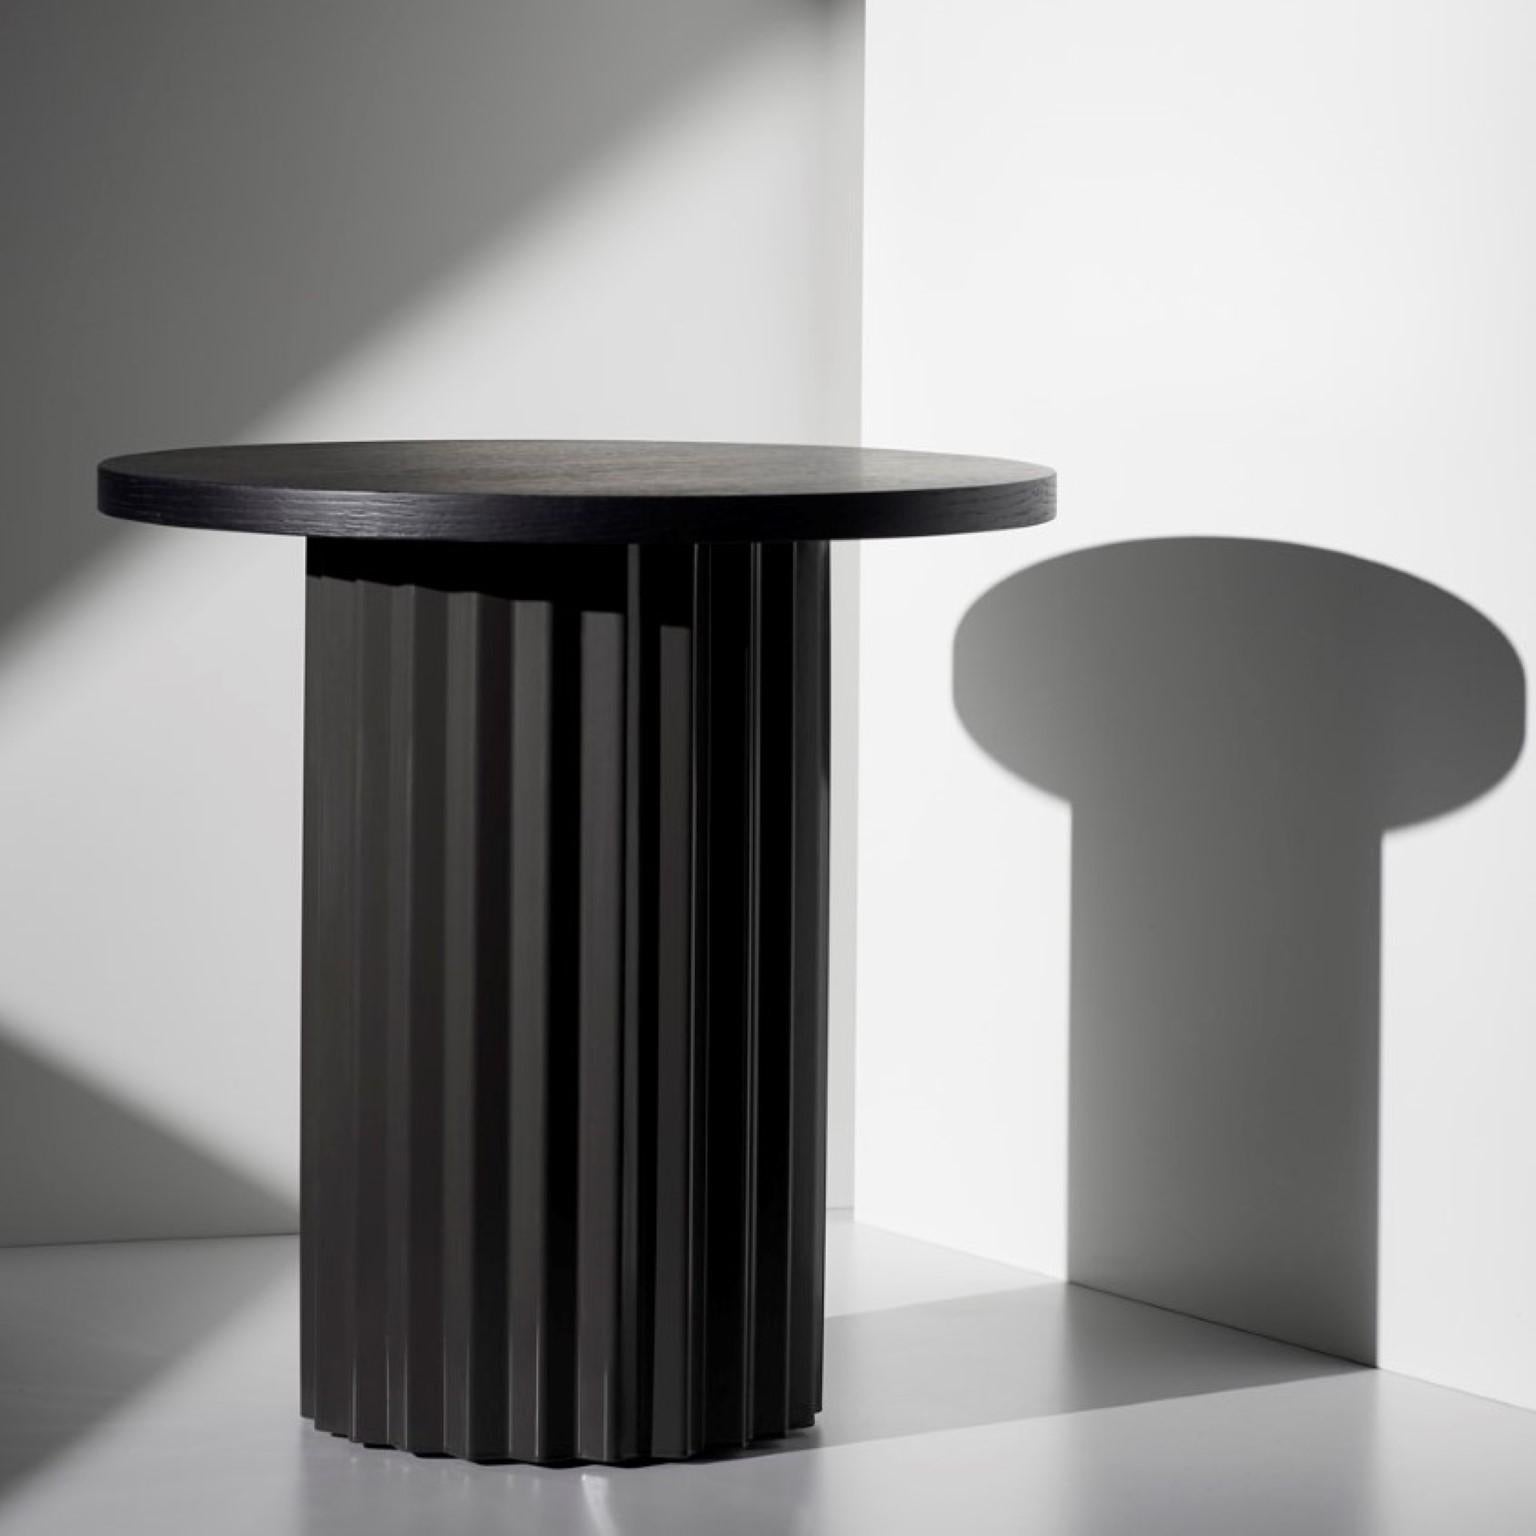 Column lounge table with oak 40 by Lisette Rützou
Dimensions: D 40 x H 41 cm
Materials: Column with black tained oak tabletop
Also available in Ø 60

Lisette Rützou’s design is motivated by an urge to articulate a story. Inspired by the beauty